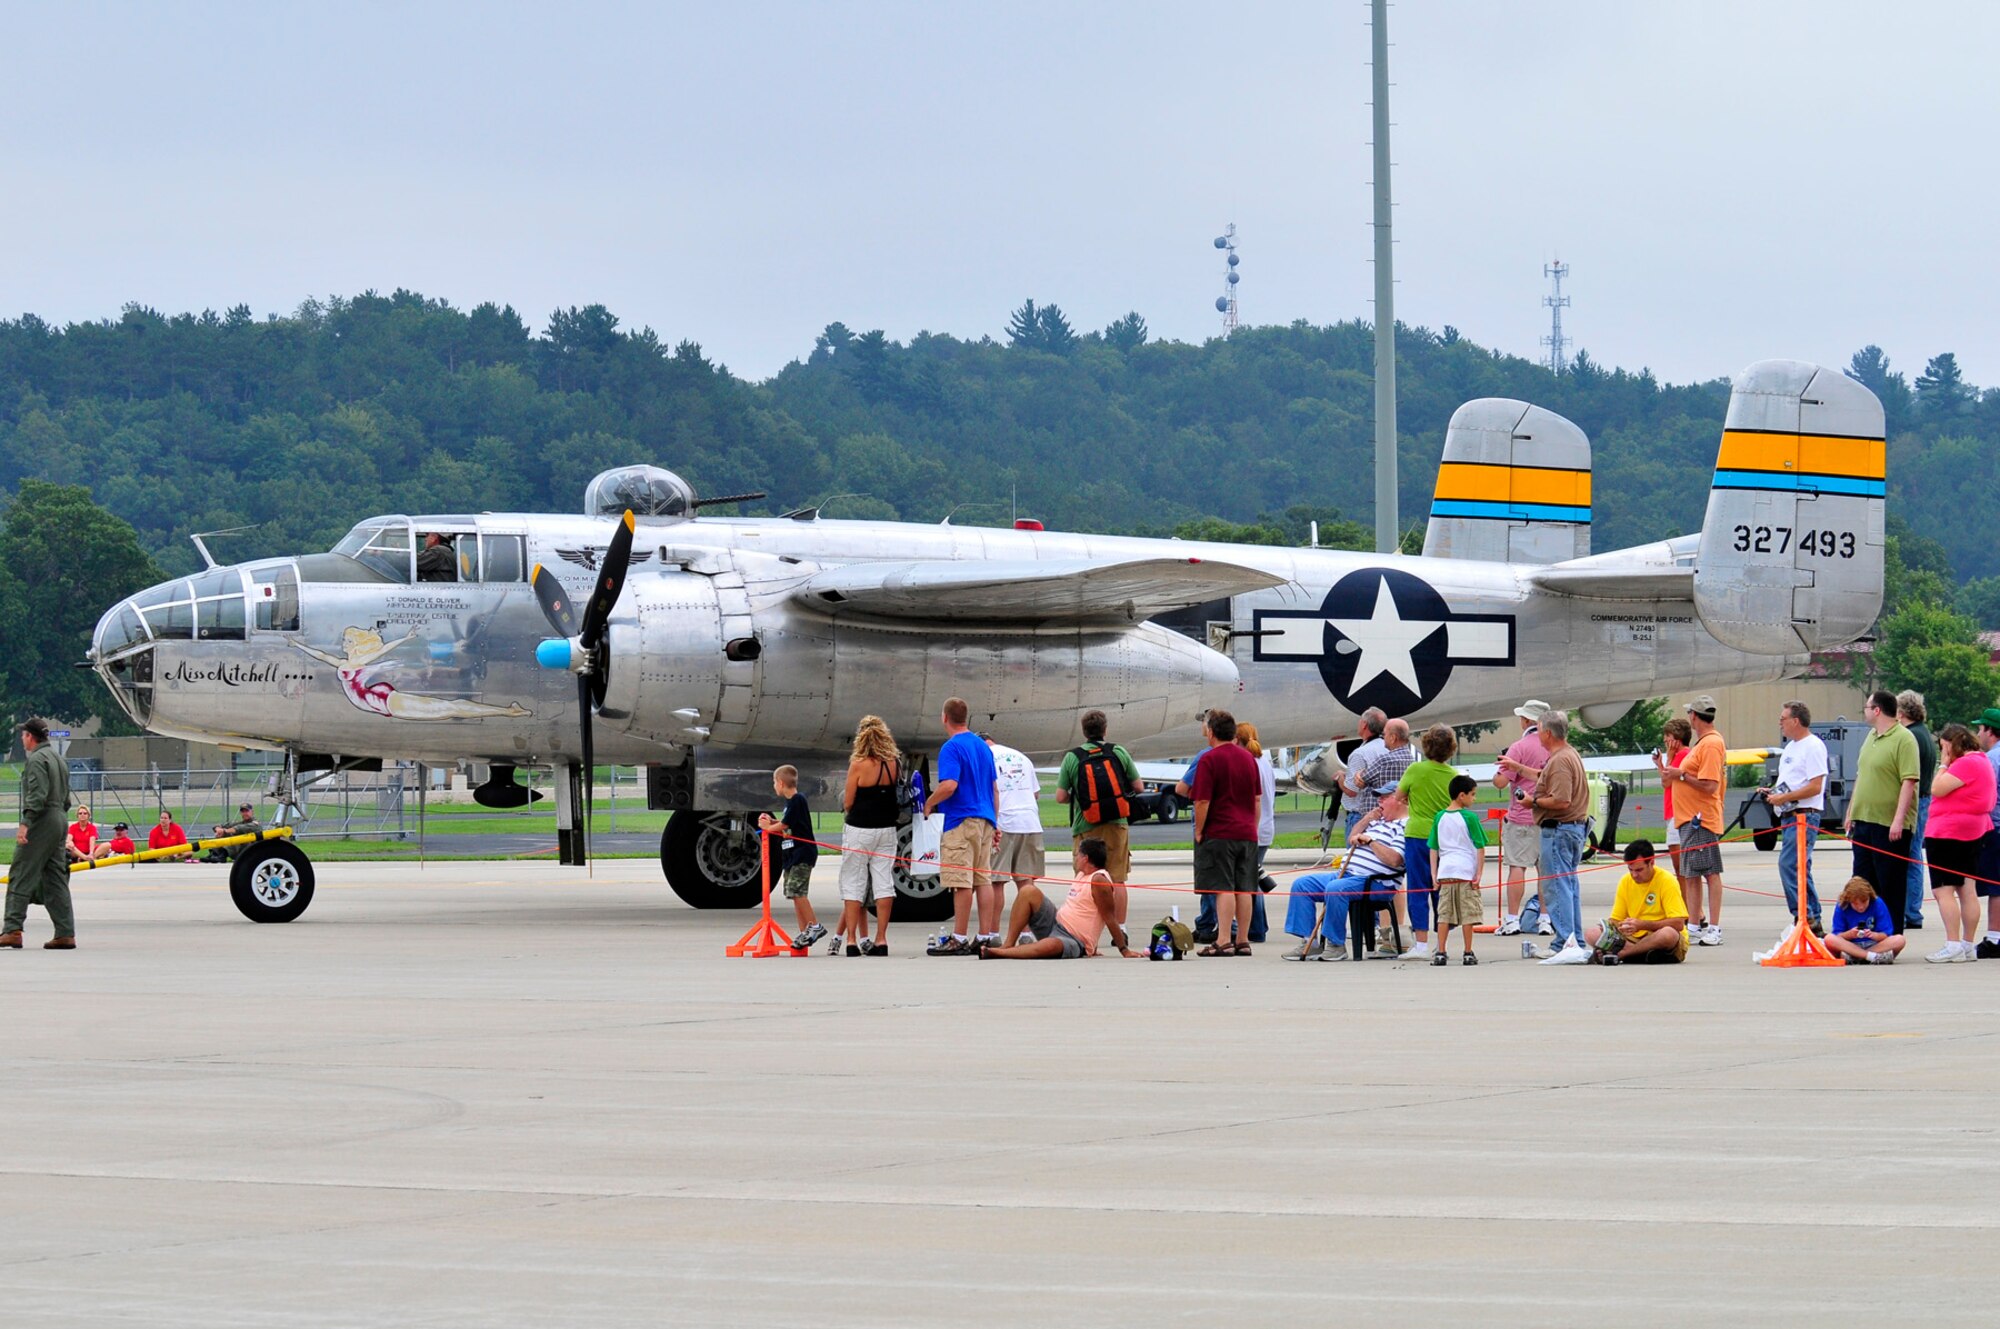 World War II B-25 Mitchell bomber from the Minnesota Wing of the Commemerative Air Force at Volk Field Open House, 21 Aug 2010.  (U.S. Air Force photo courtesy Joe Oliva) (RELEASED)